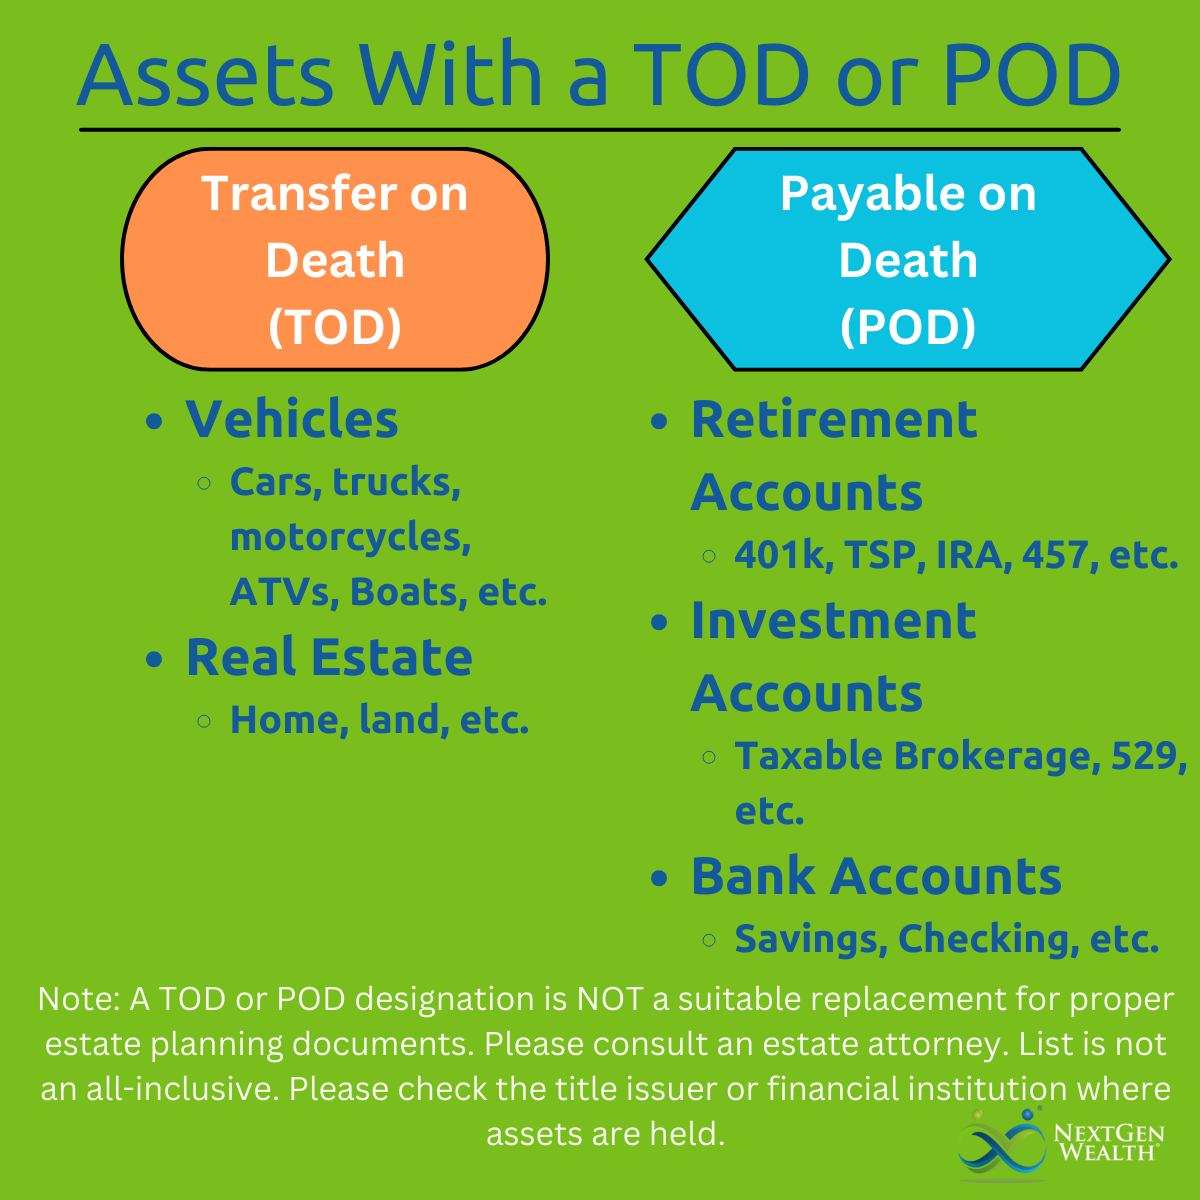 Assets With a TOD or POD